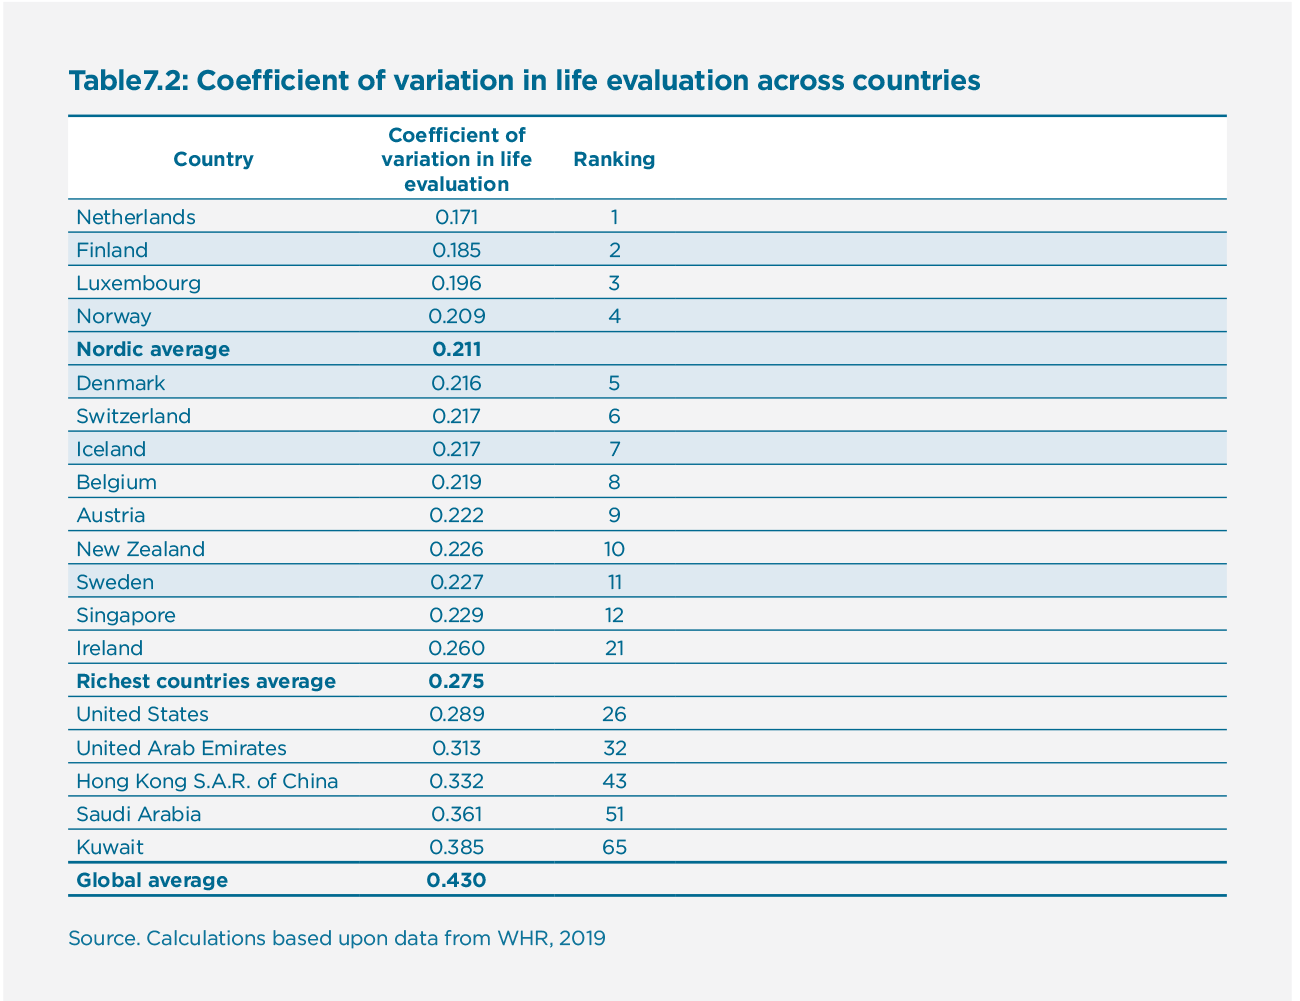 Table 7.2: Coefficient of variation in life evaluation across countries